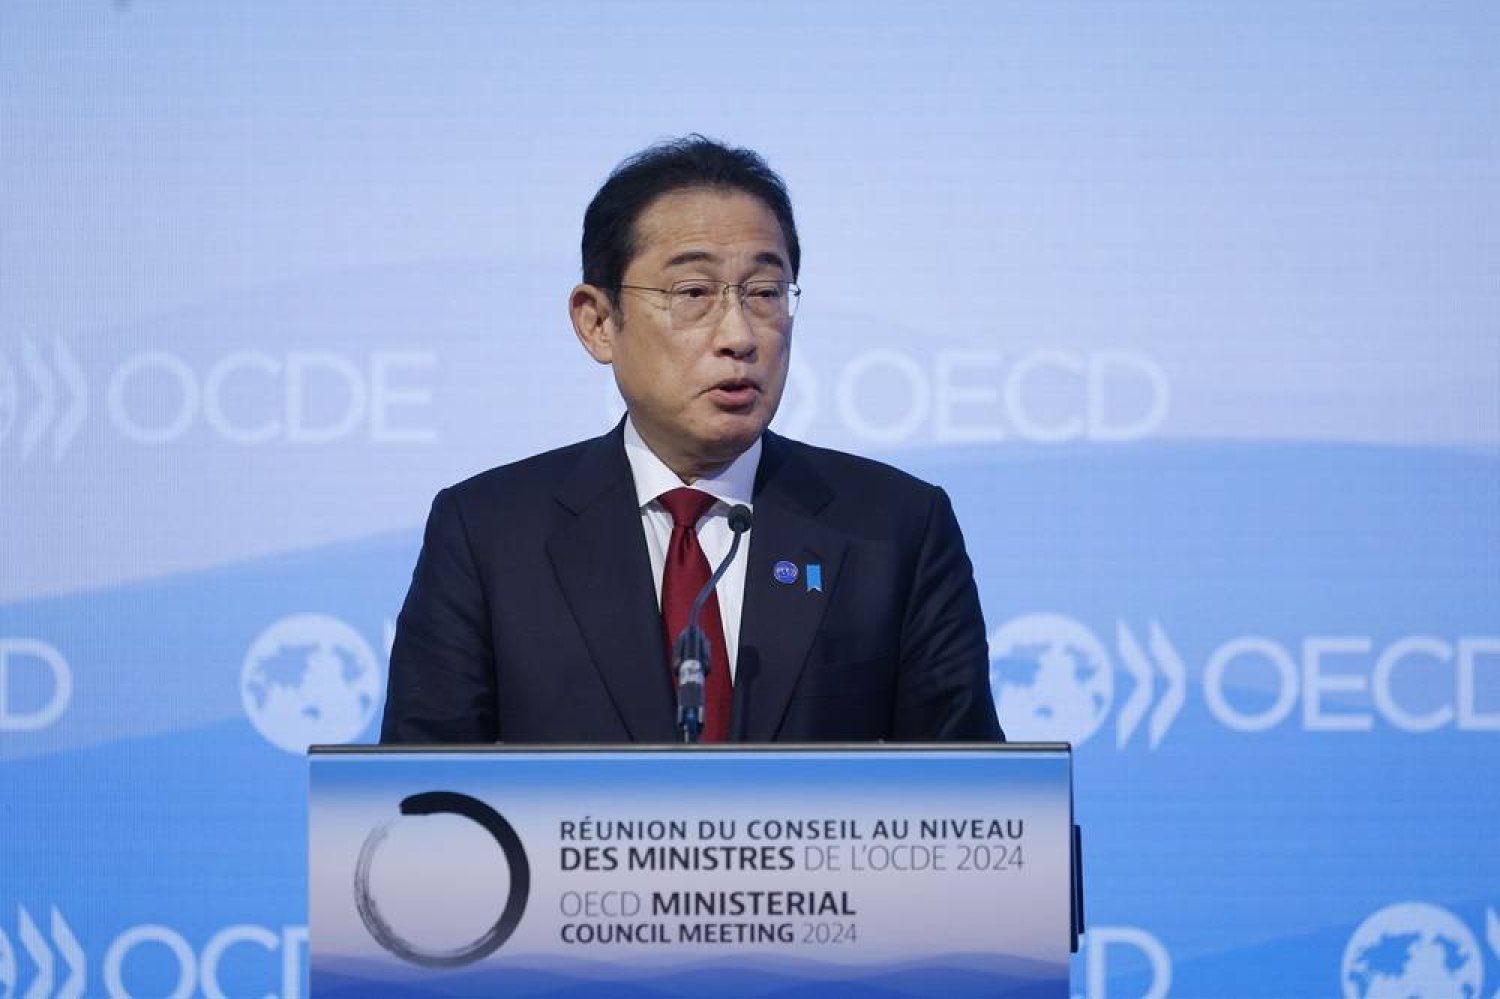  Japanese Prime Minister Fumio Kishida delivers his speech during the Organization for Economic Cooperation and Development (OECD) Ministerial Council Meeting (MCM) in Paris, France, 02 May 2024. (EPA)